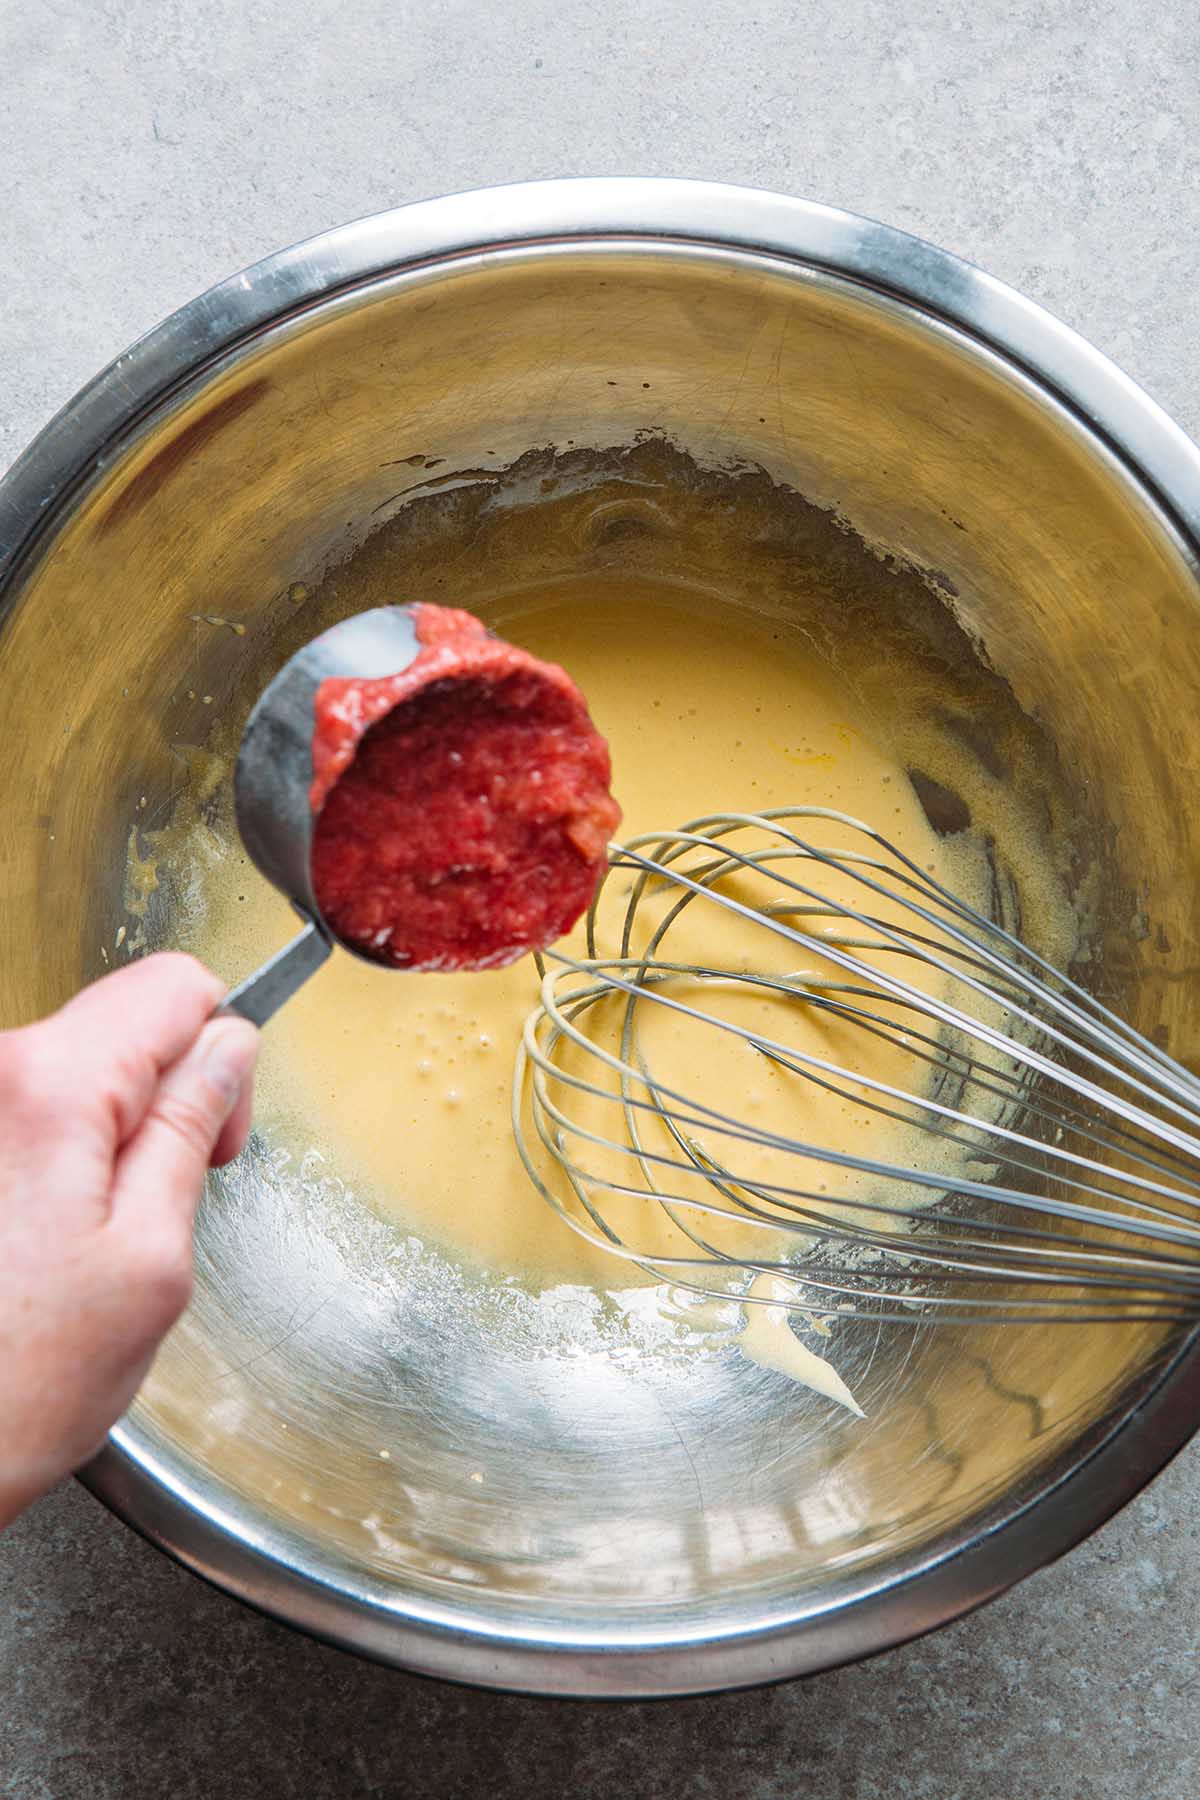 A hand dripping rhubarb curd into whisked egg yolks.